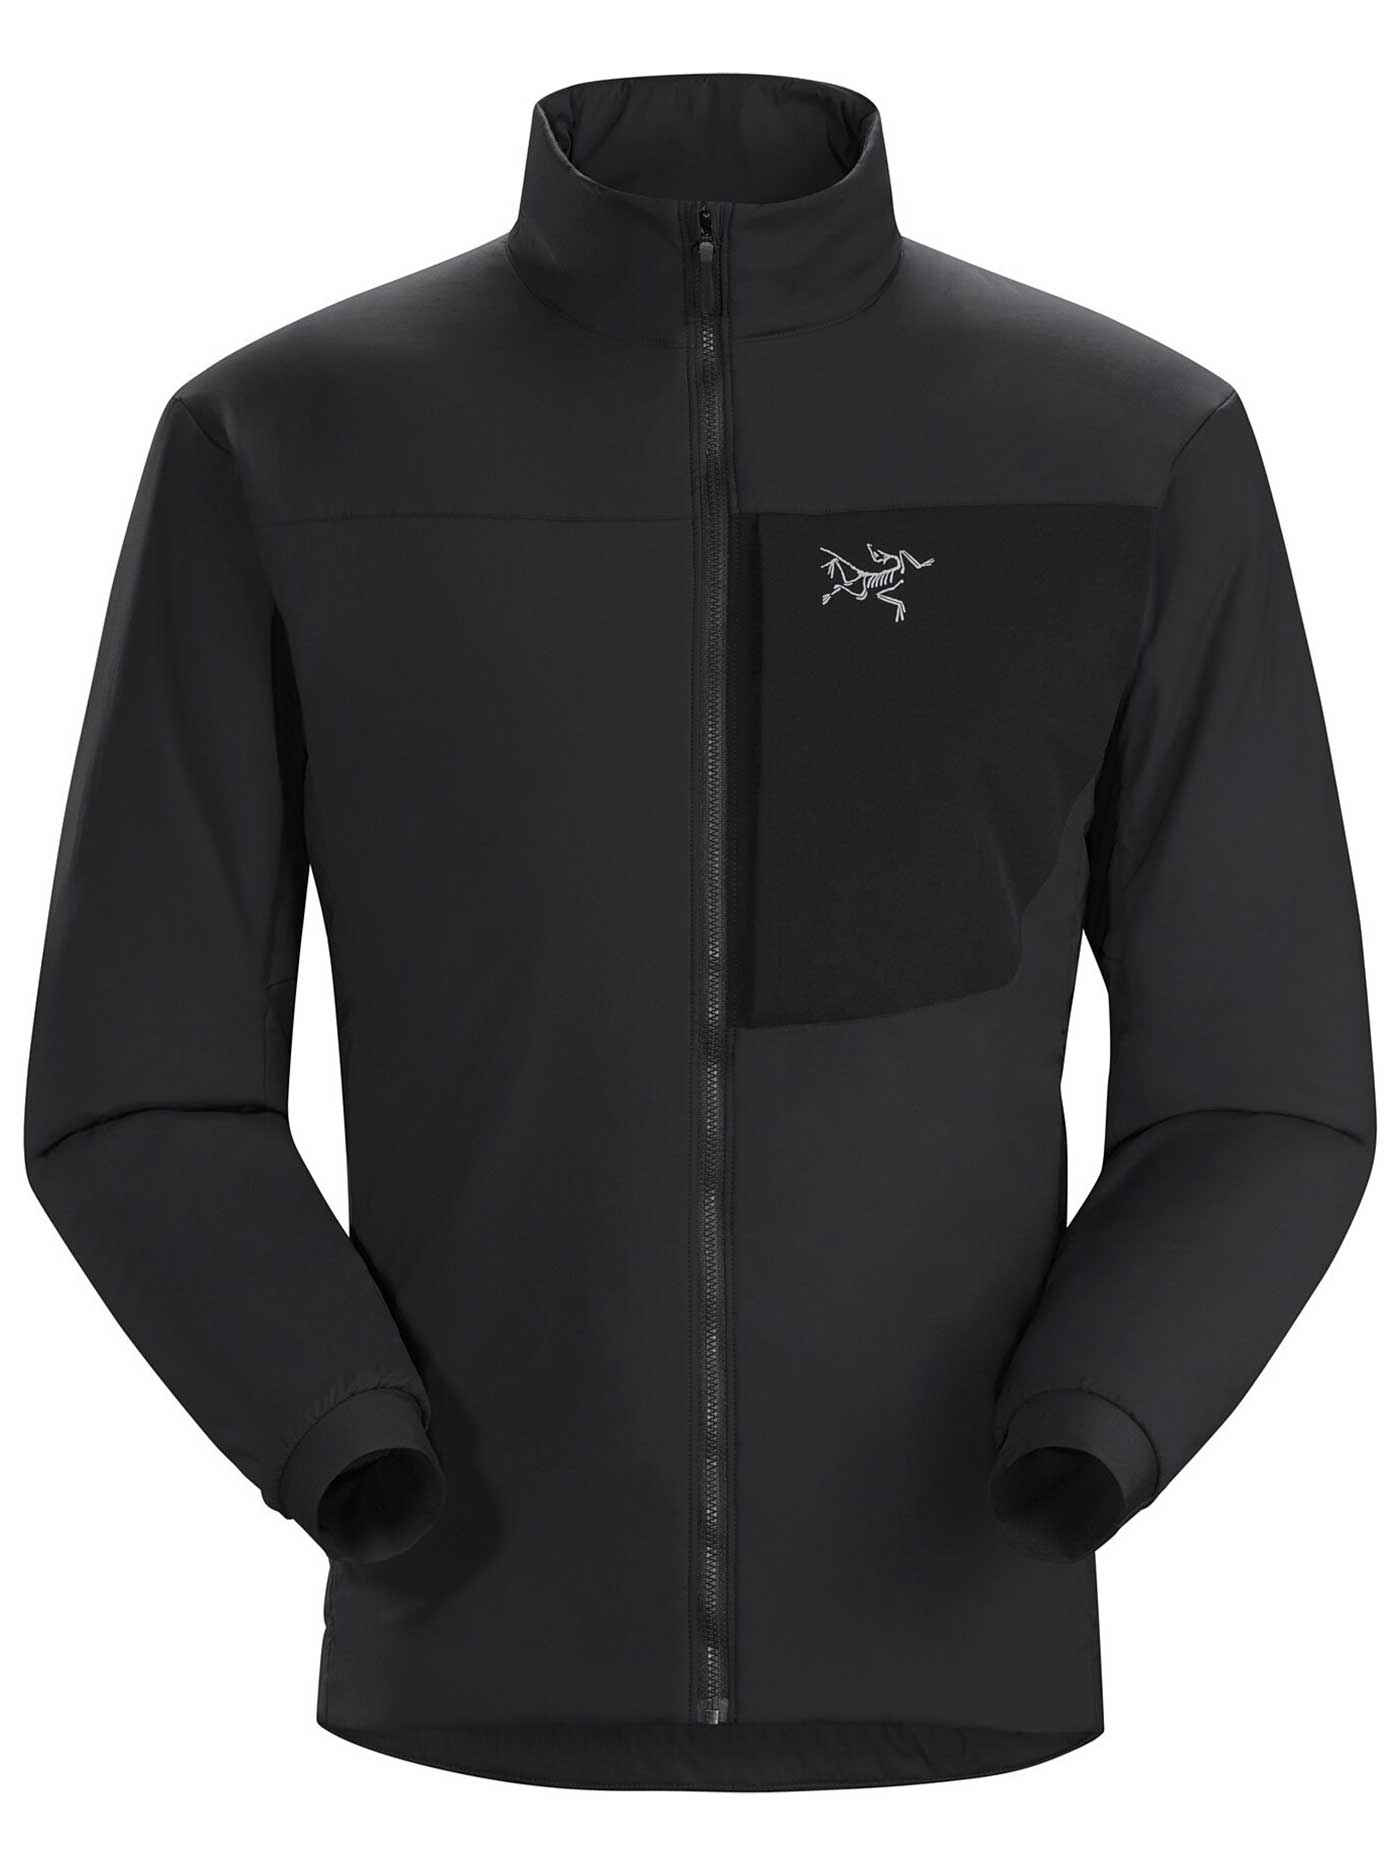 New models - find Shop Proton LT Jacket with great reduction